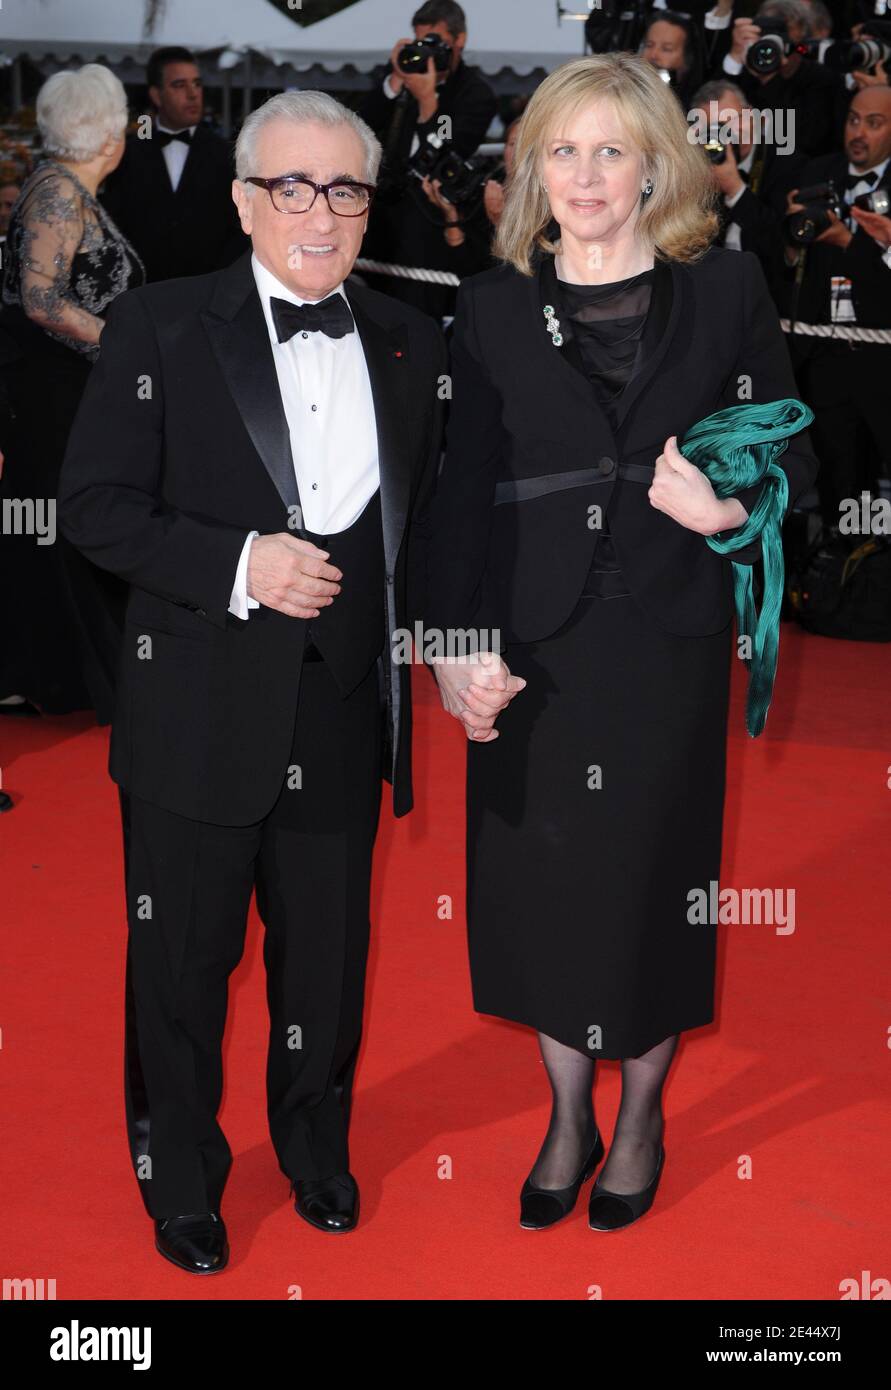 Martin Scorsese and Helen Morris attend the screening of Bright Star at the 62nd Cannes Film Festival. Cannes, France, May 15, 2009. Photo by Lionel Hahn/ABACAPRESS.COM Stock Photo